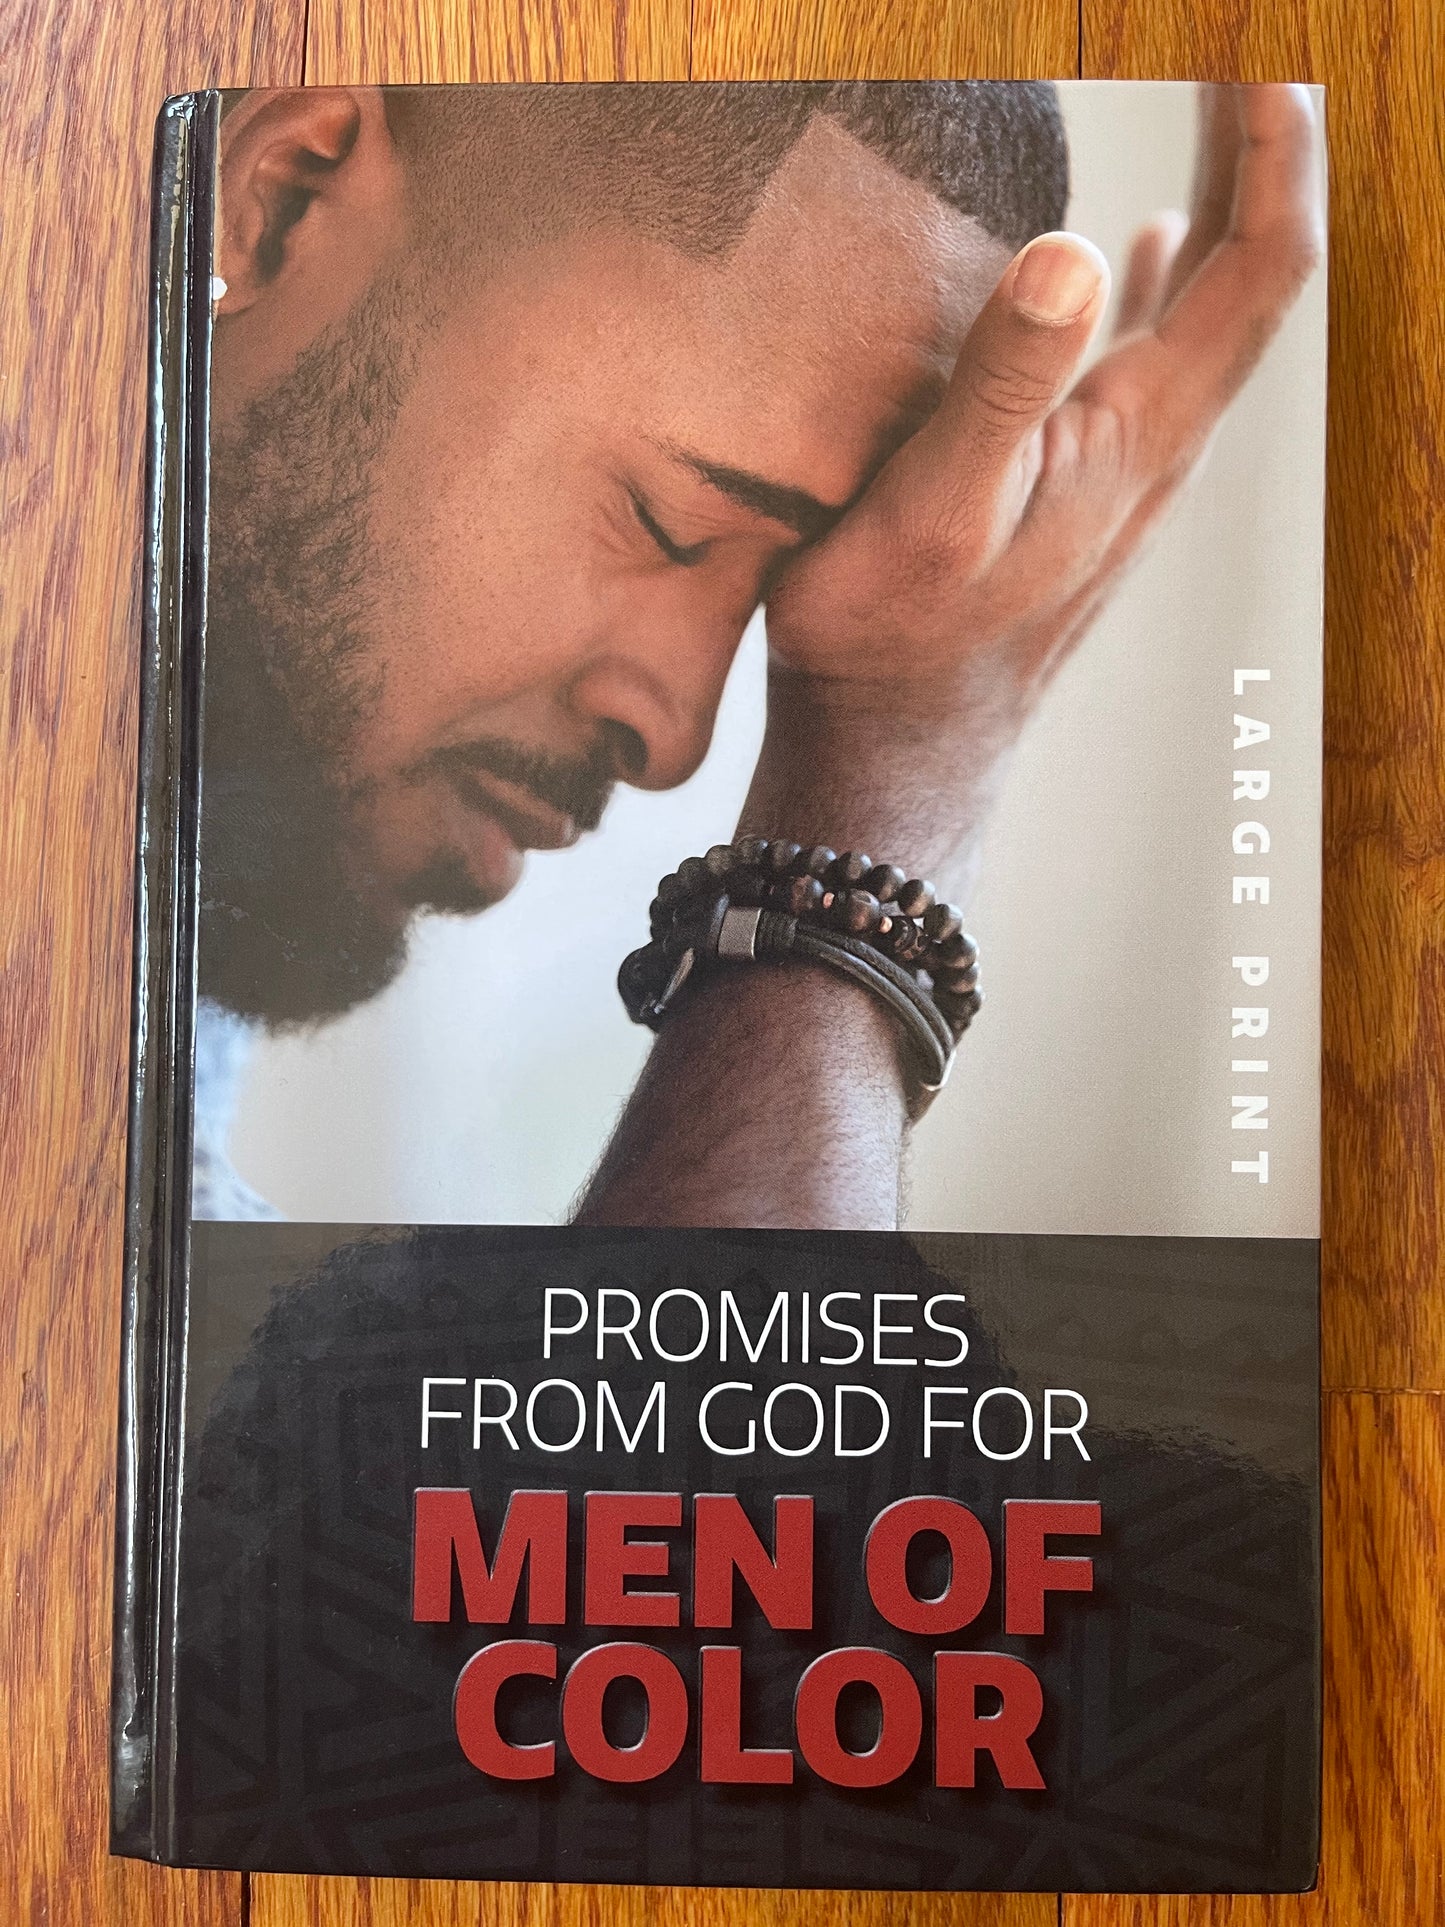 Promises from God for Men of Color - Hardcover - Gift Edition